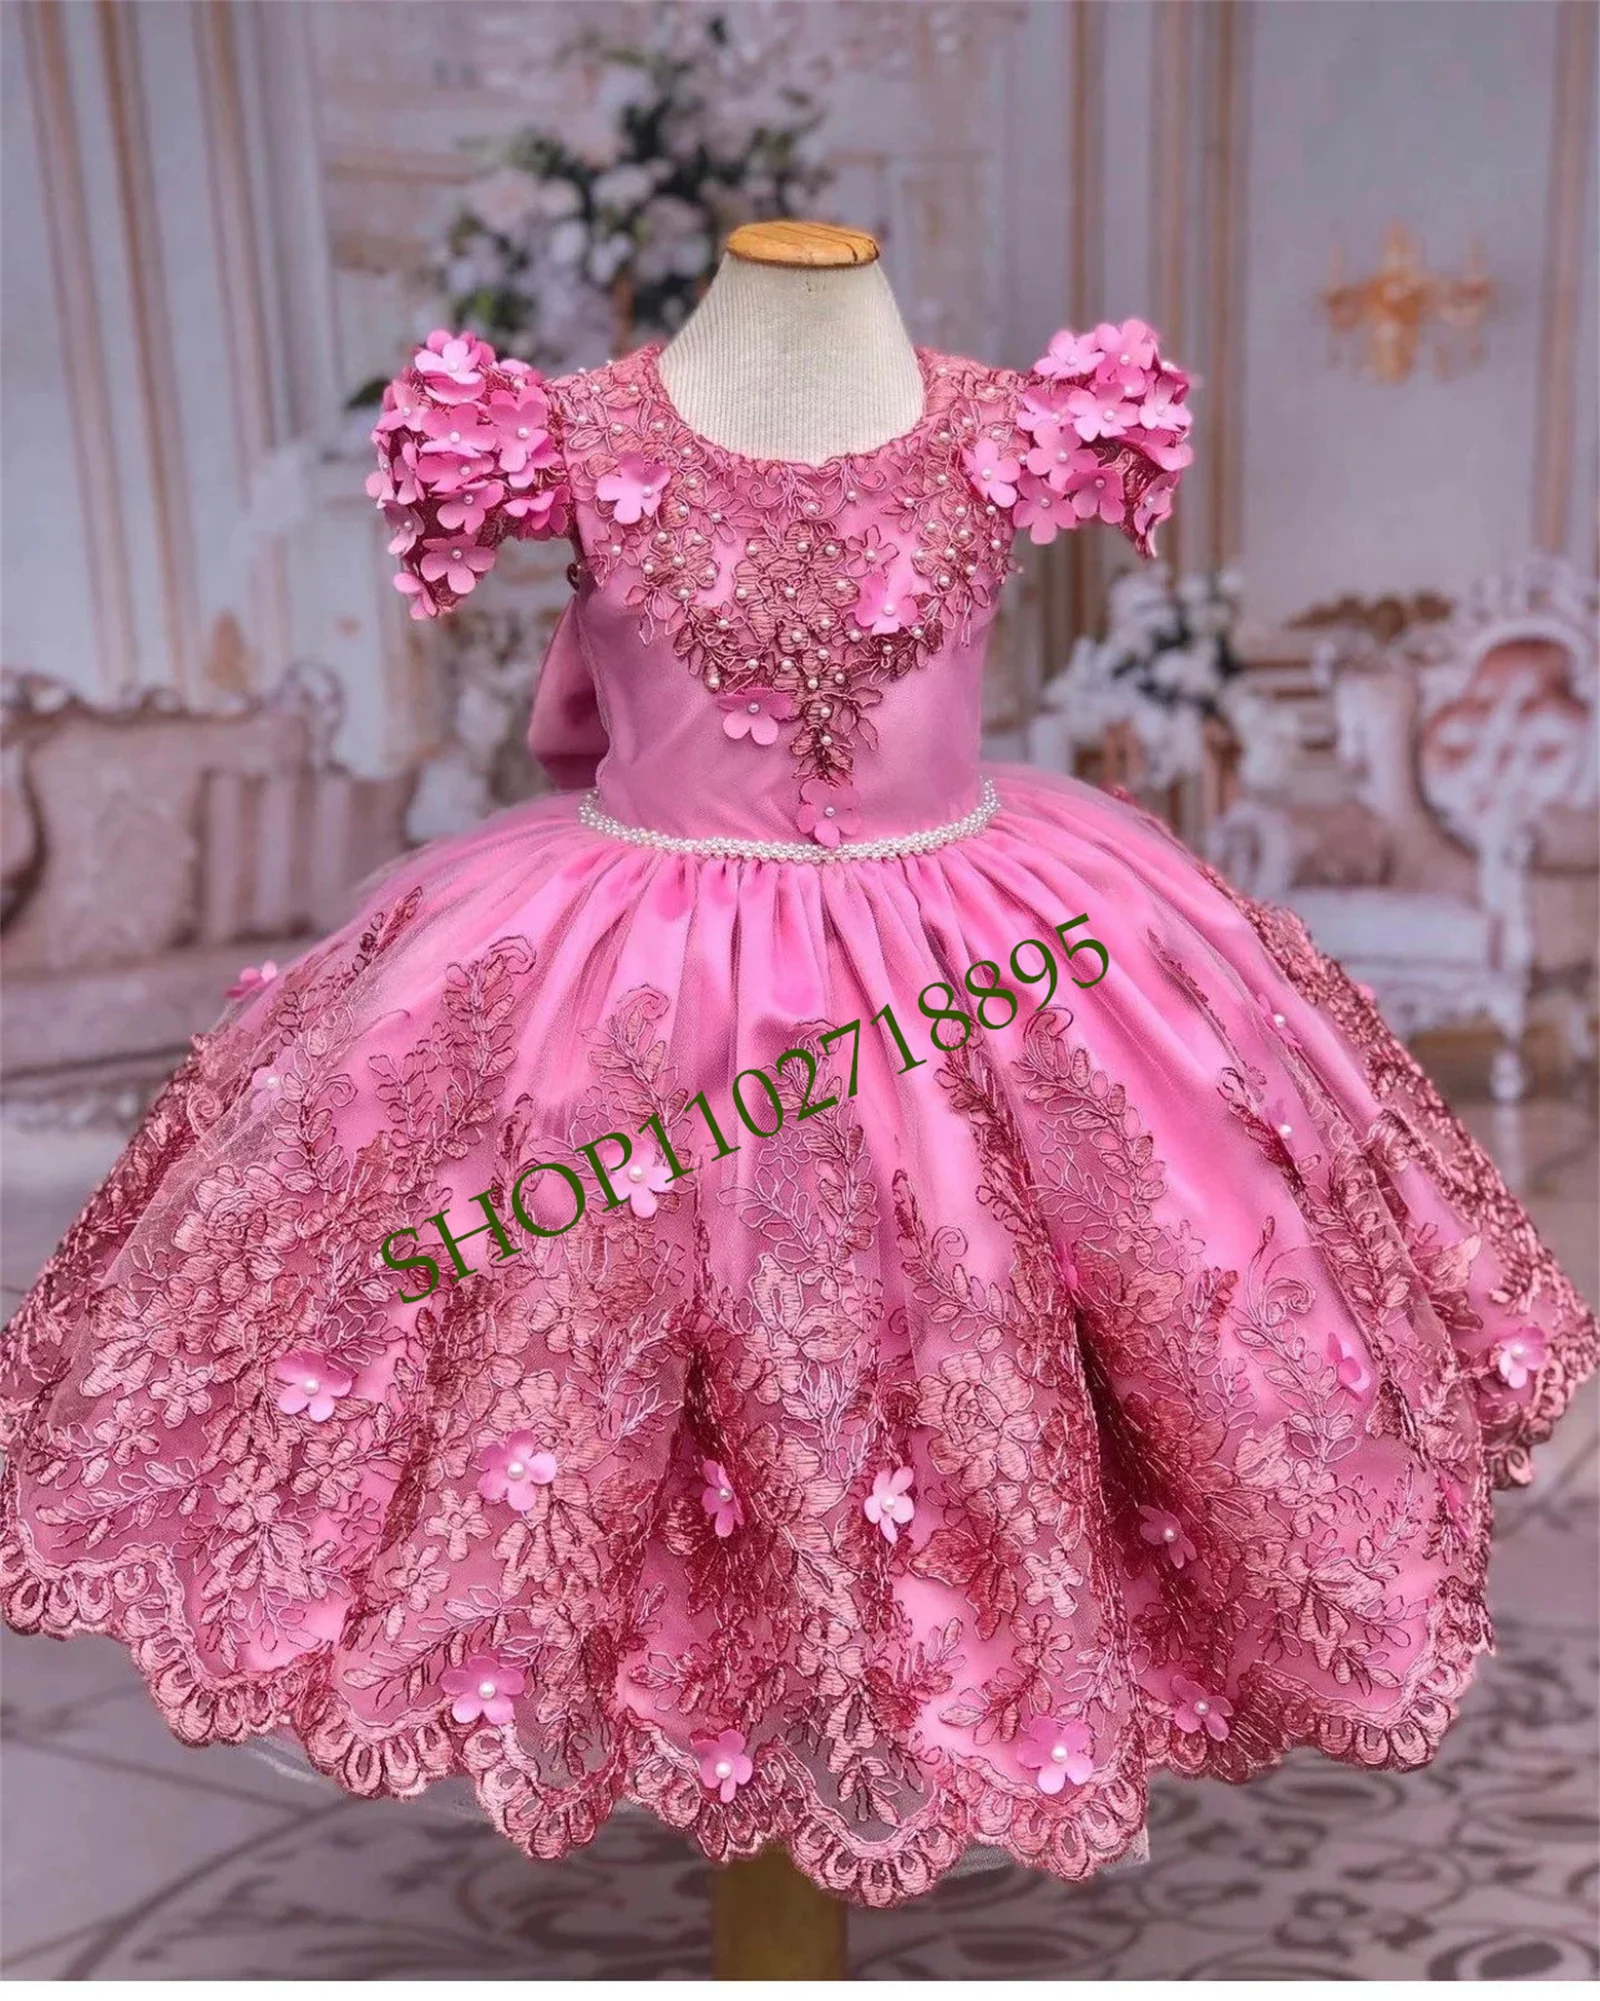 

New Pink Flower Girl Dresse Beads With Pearls Bow Puffy O-neck Birthday Party Pageant Dress Kids Baby For Wedding Ball Gown